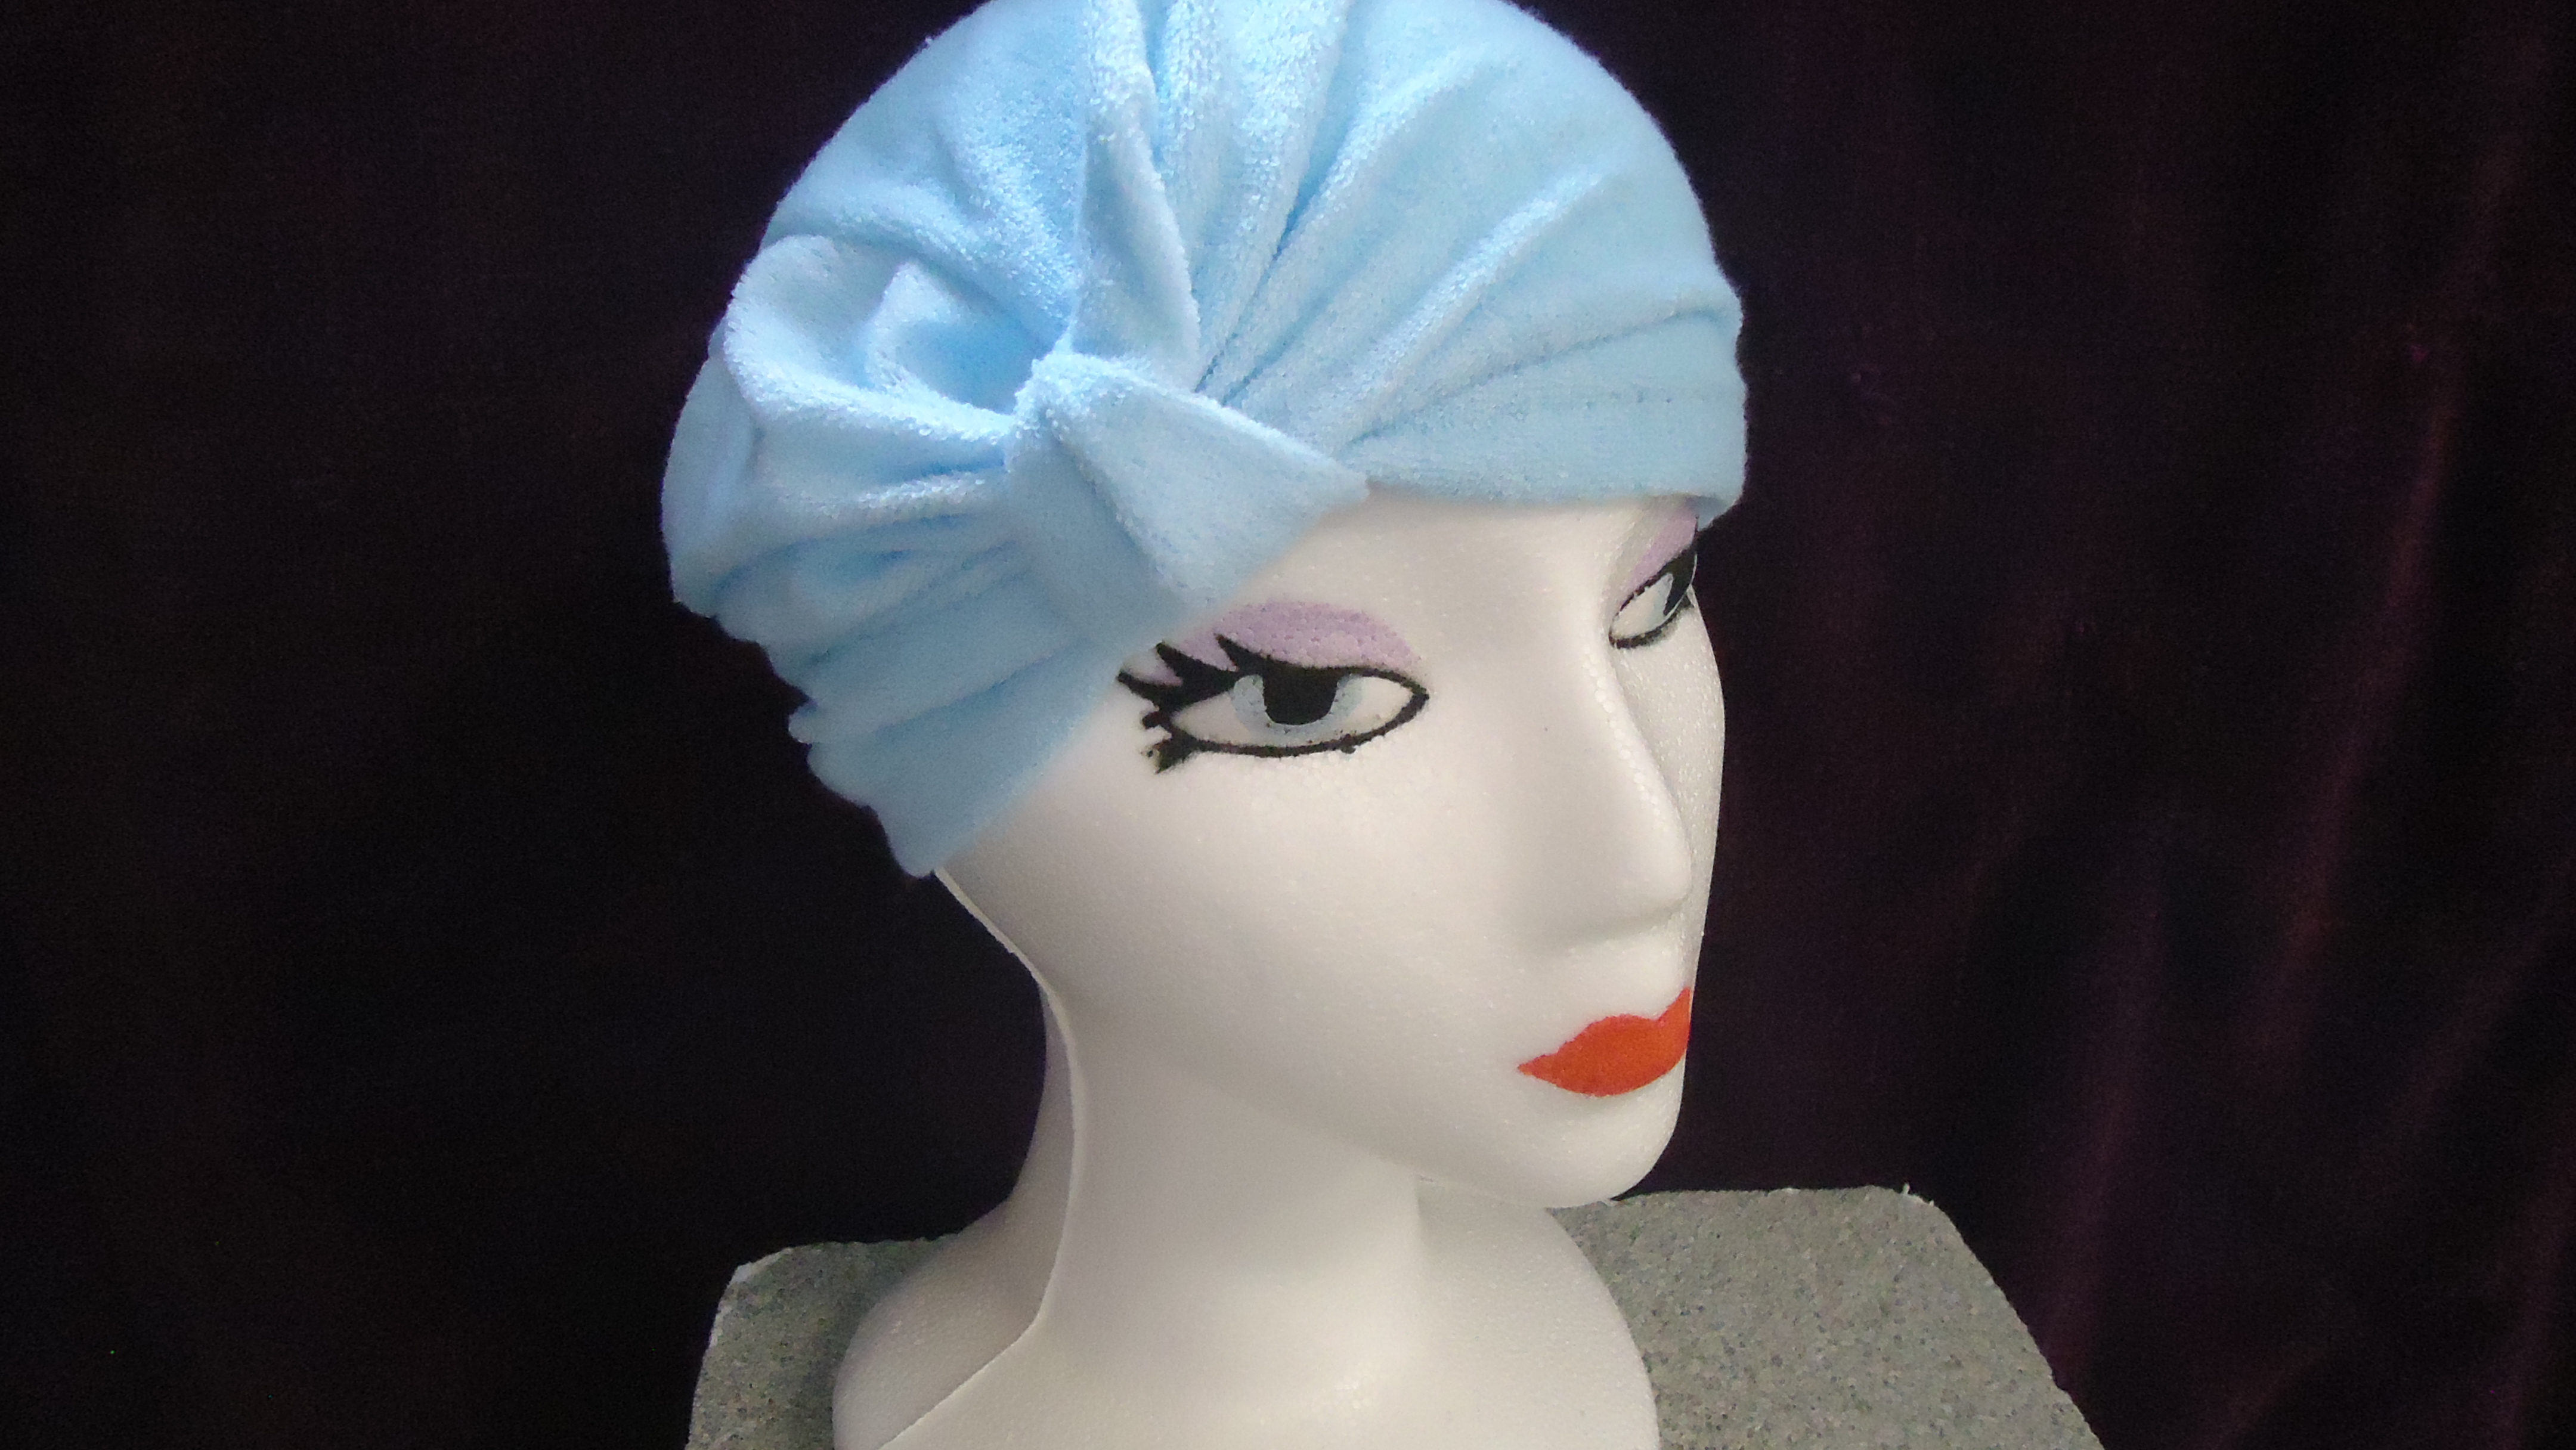 #TTURBAN COMFORT-STRETCH tm TERRY TURBAN- LIGHT BLUE ON #800W10XCMH COSMETIQUE tm HEAD: MADE IN THE USA